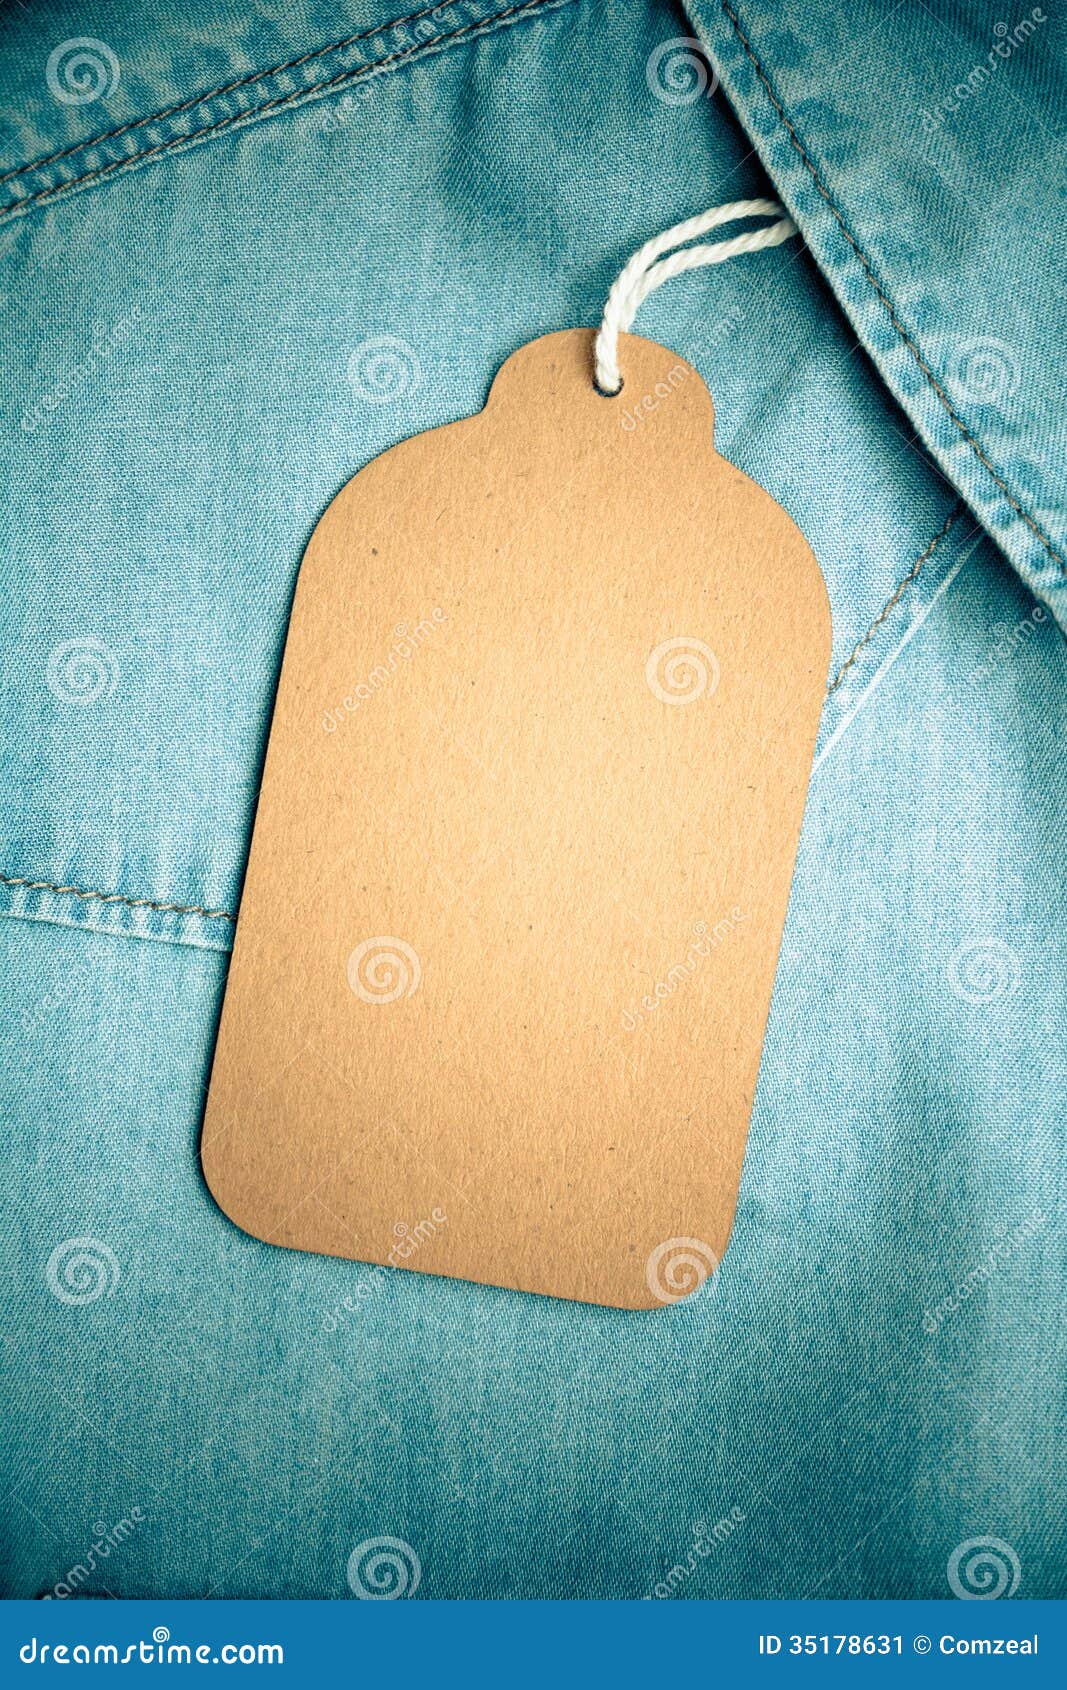 Denim Texture with Paper Jeans Tag Stock Image - Image of string ...